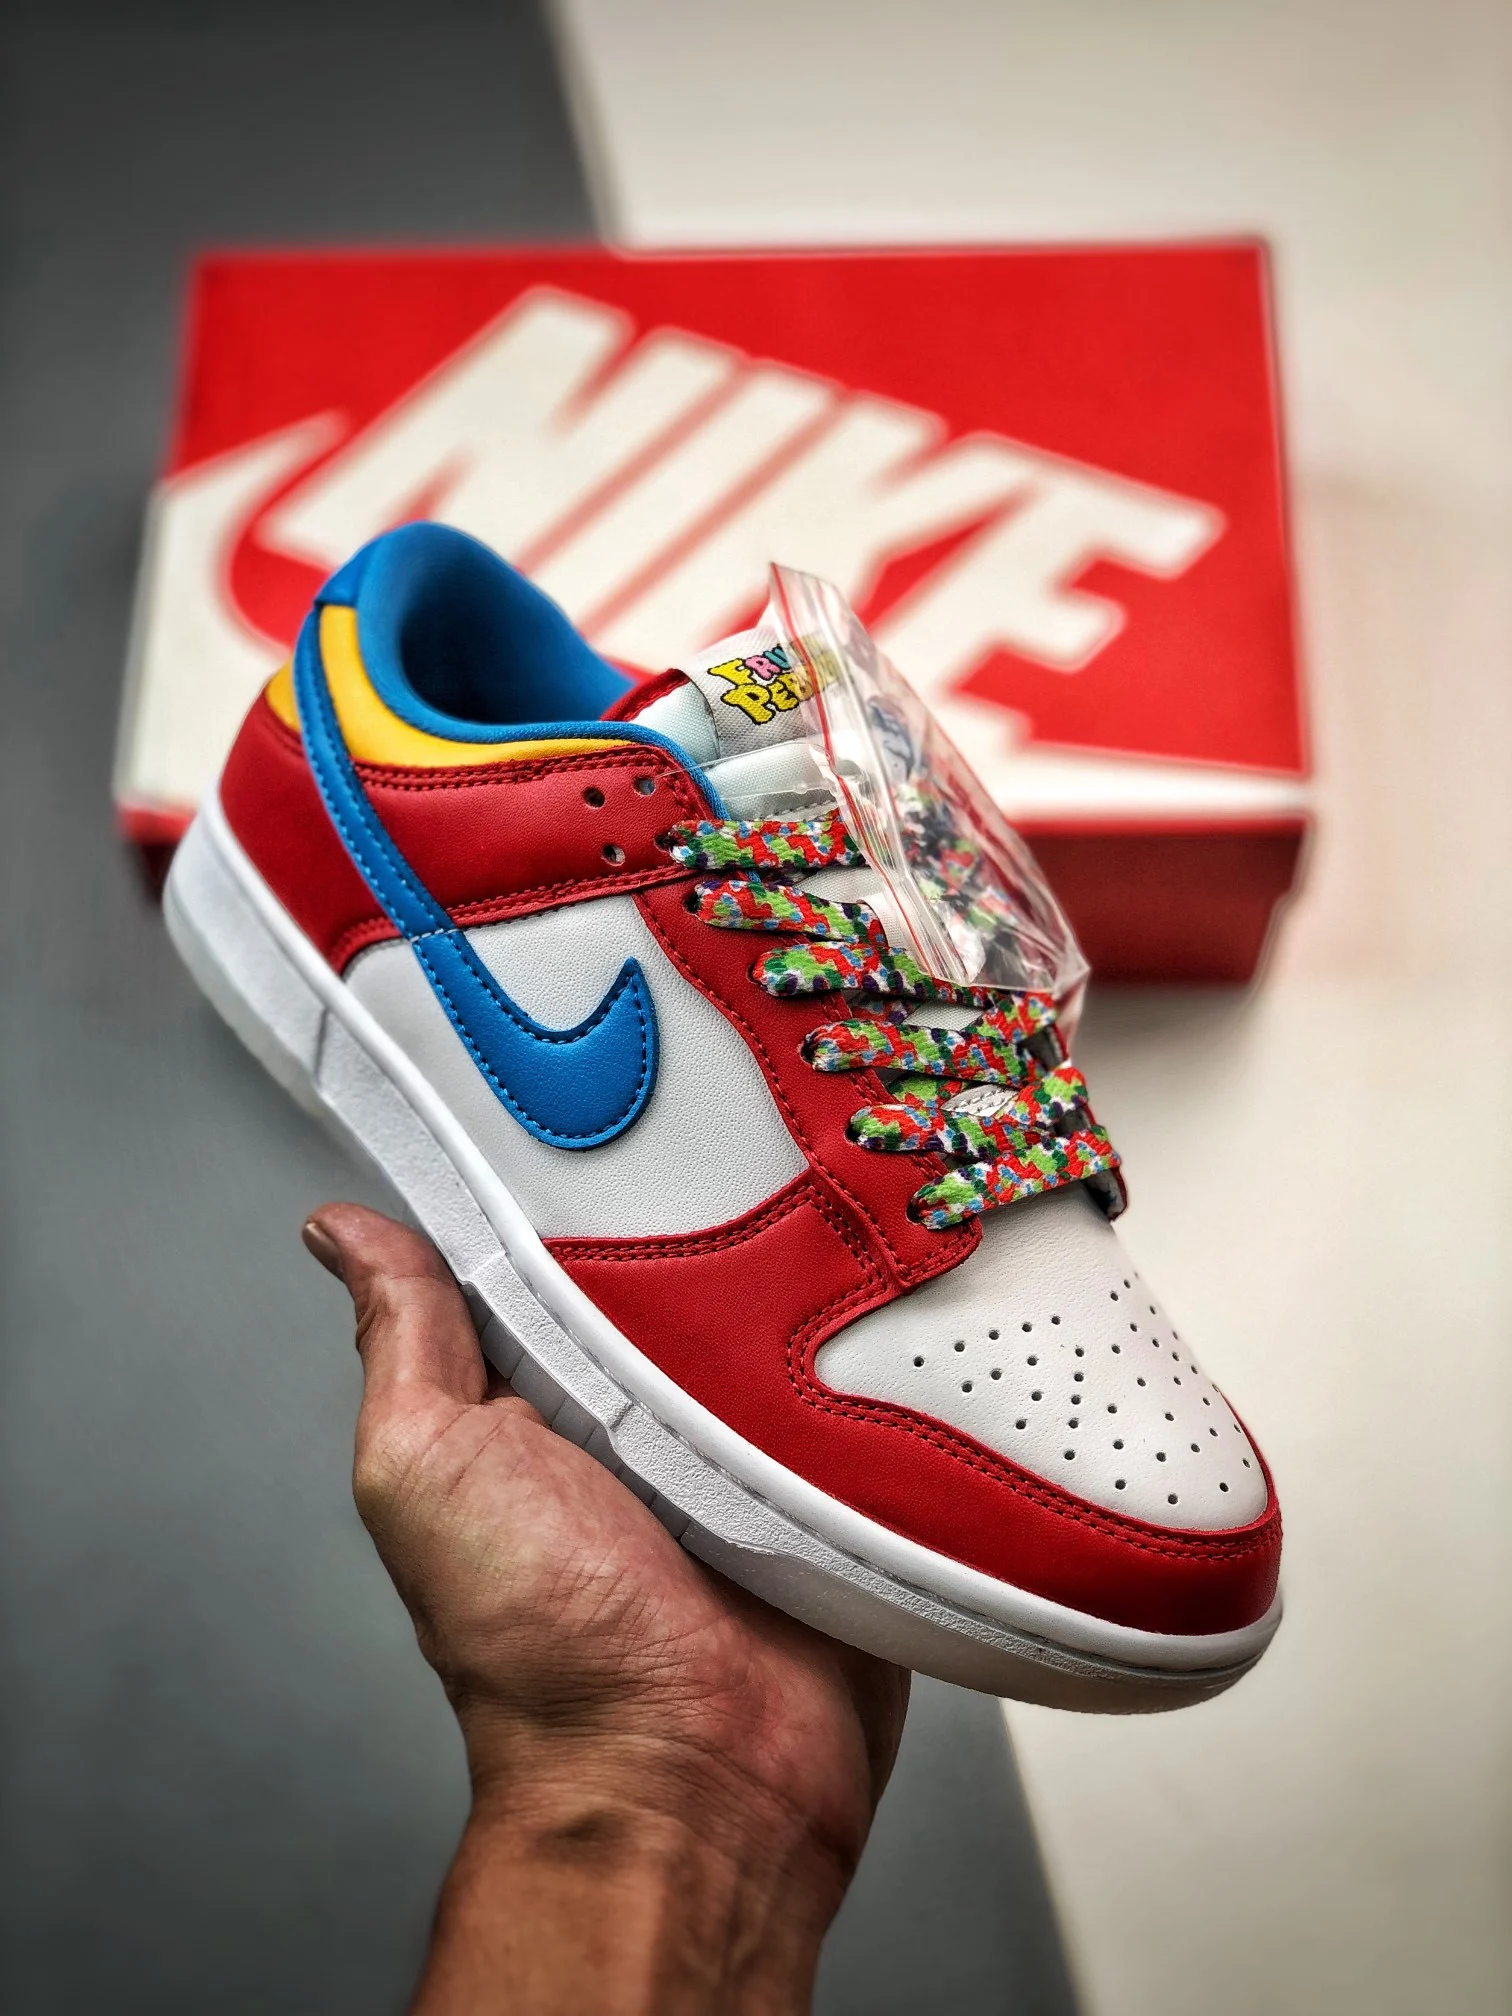 LeBron James X Nike Dunk Low Fruity Pebbles White Red-Blue DH8009-600 For Sale